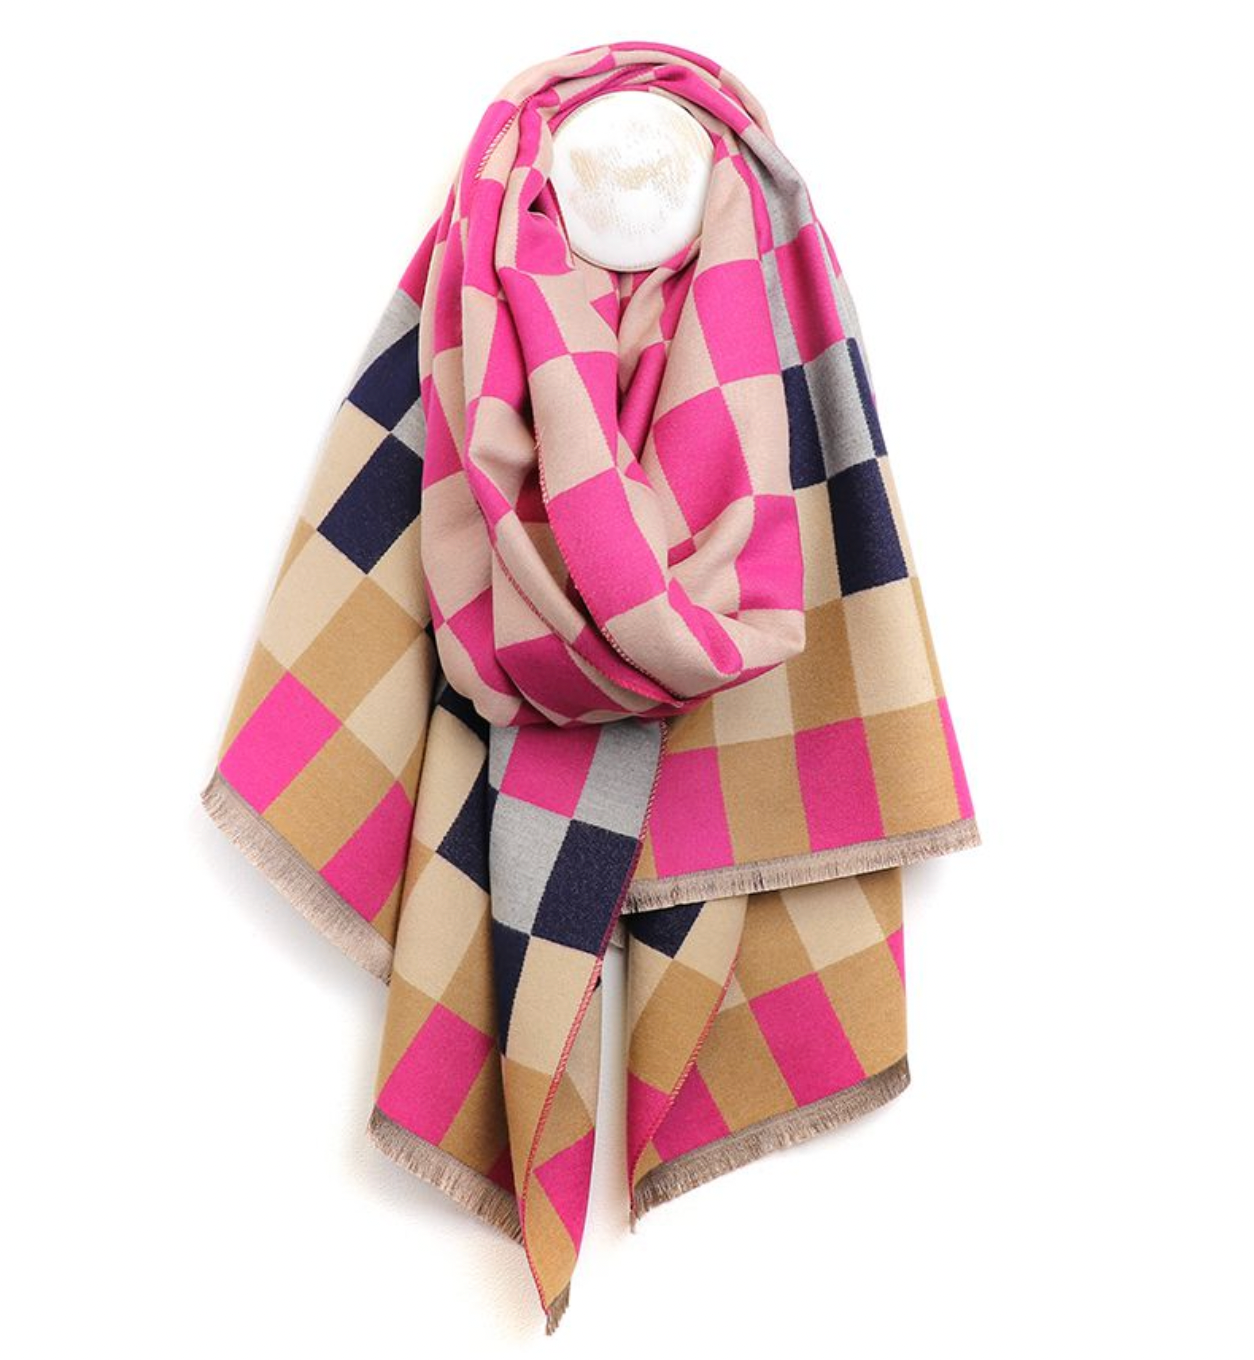 Viscose checkboard scarf in pink and navy